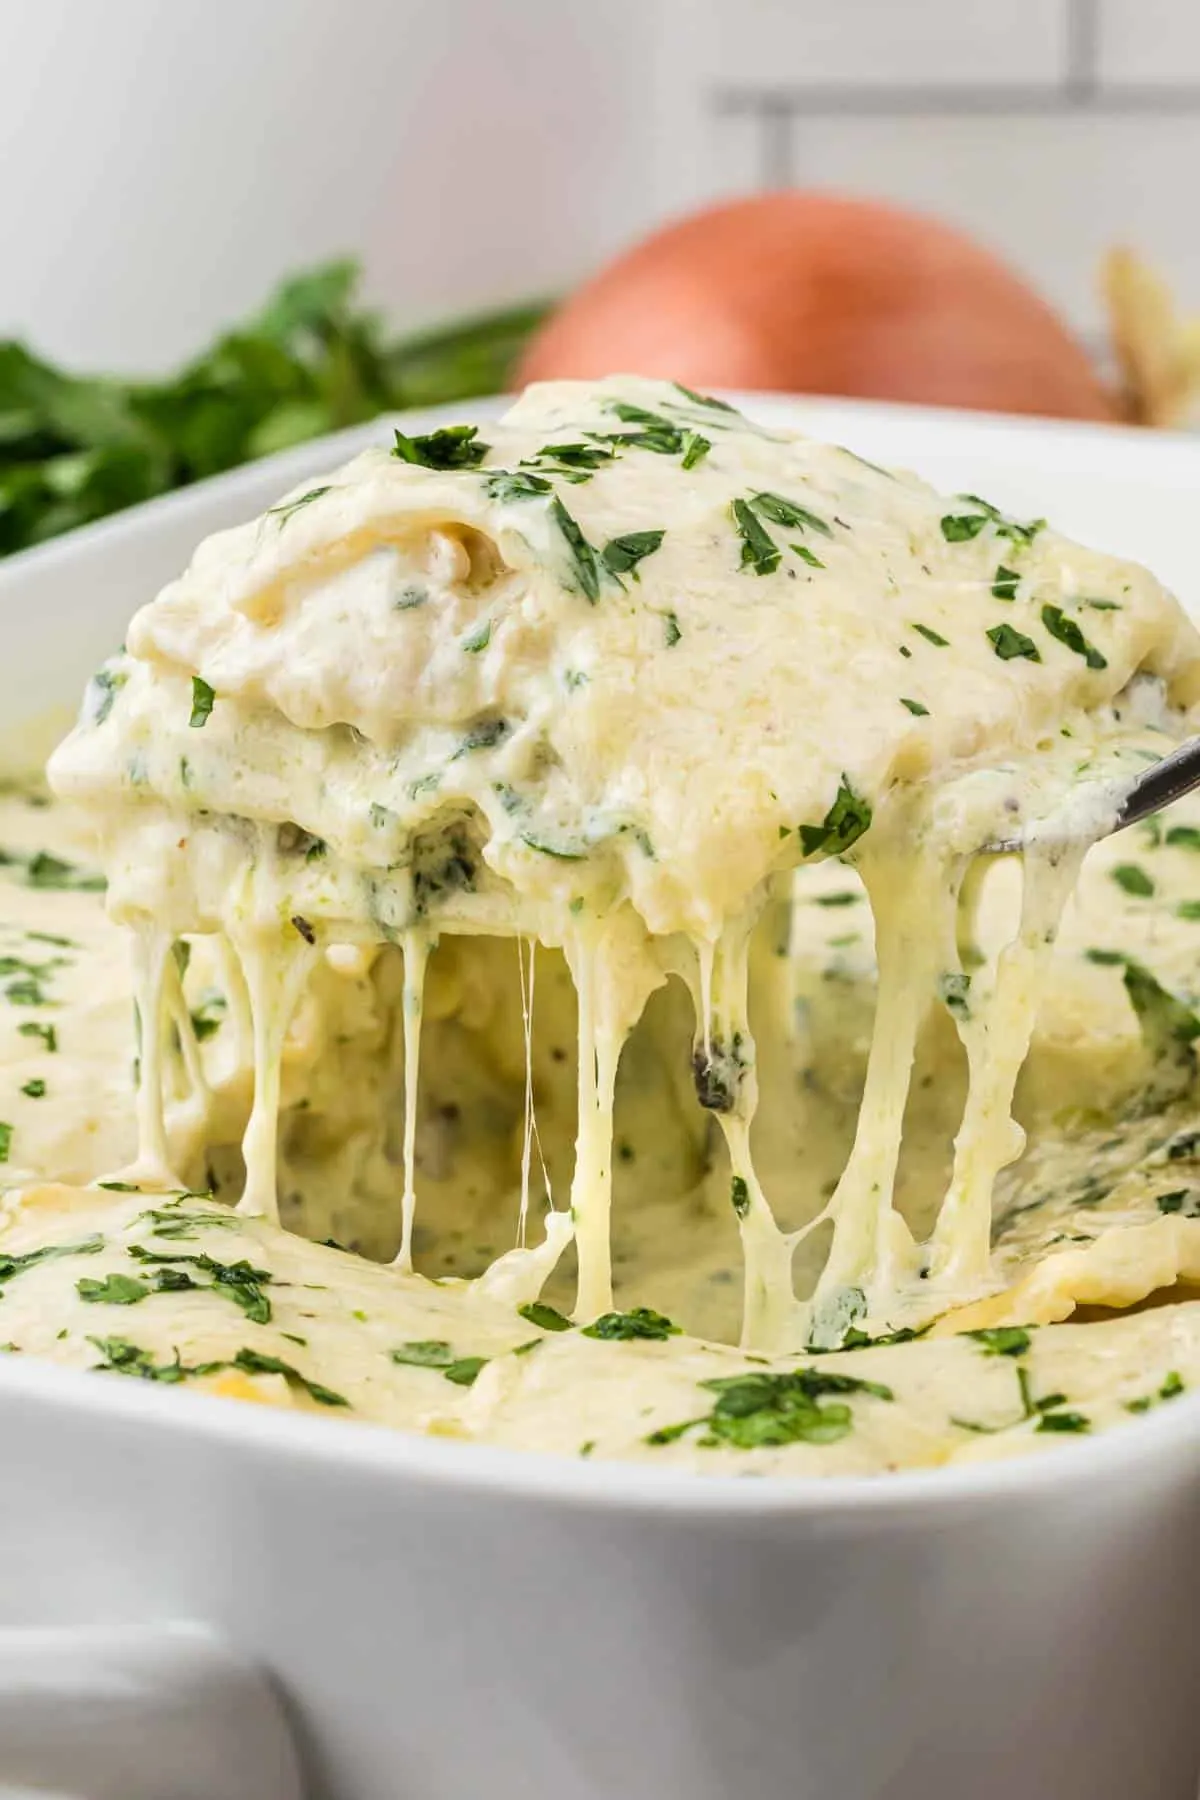 Chicken Alfredo Lasagna is a rich and delicious meal with layers of noodles, ricotta cheese, shredded chicken, mozzarella, sautéed spinach and mushrooms and a creamy Alfredo sauce.